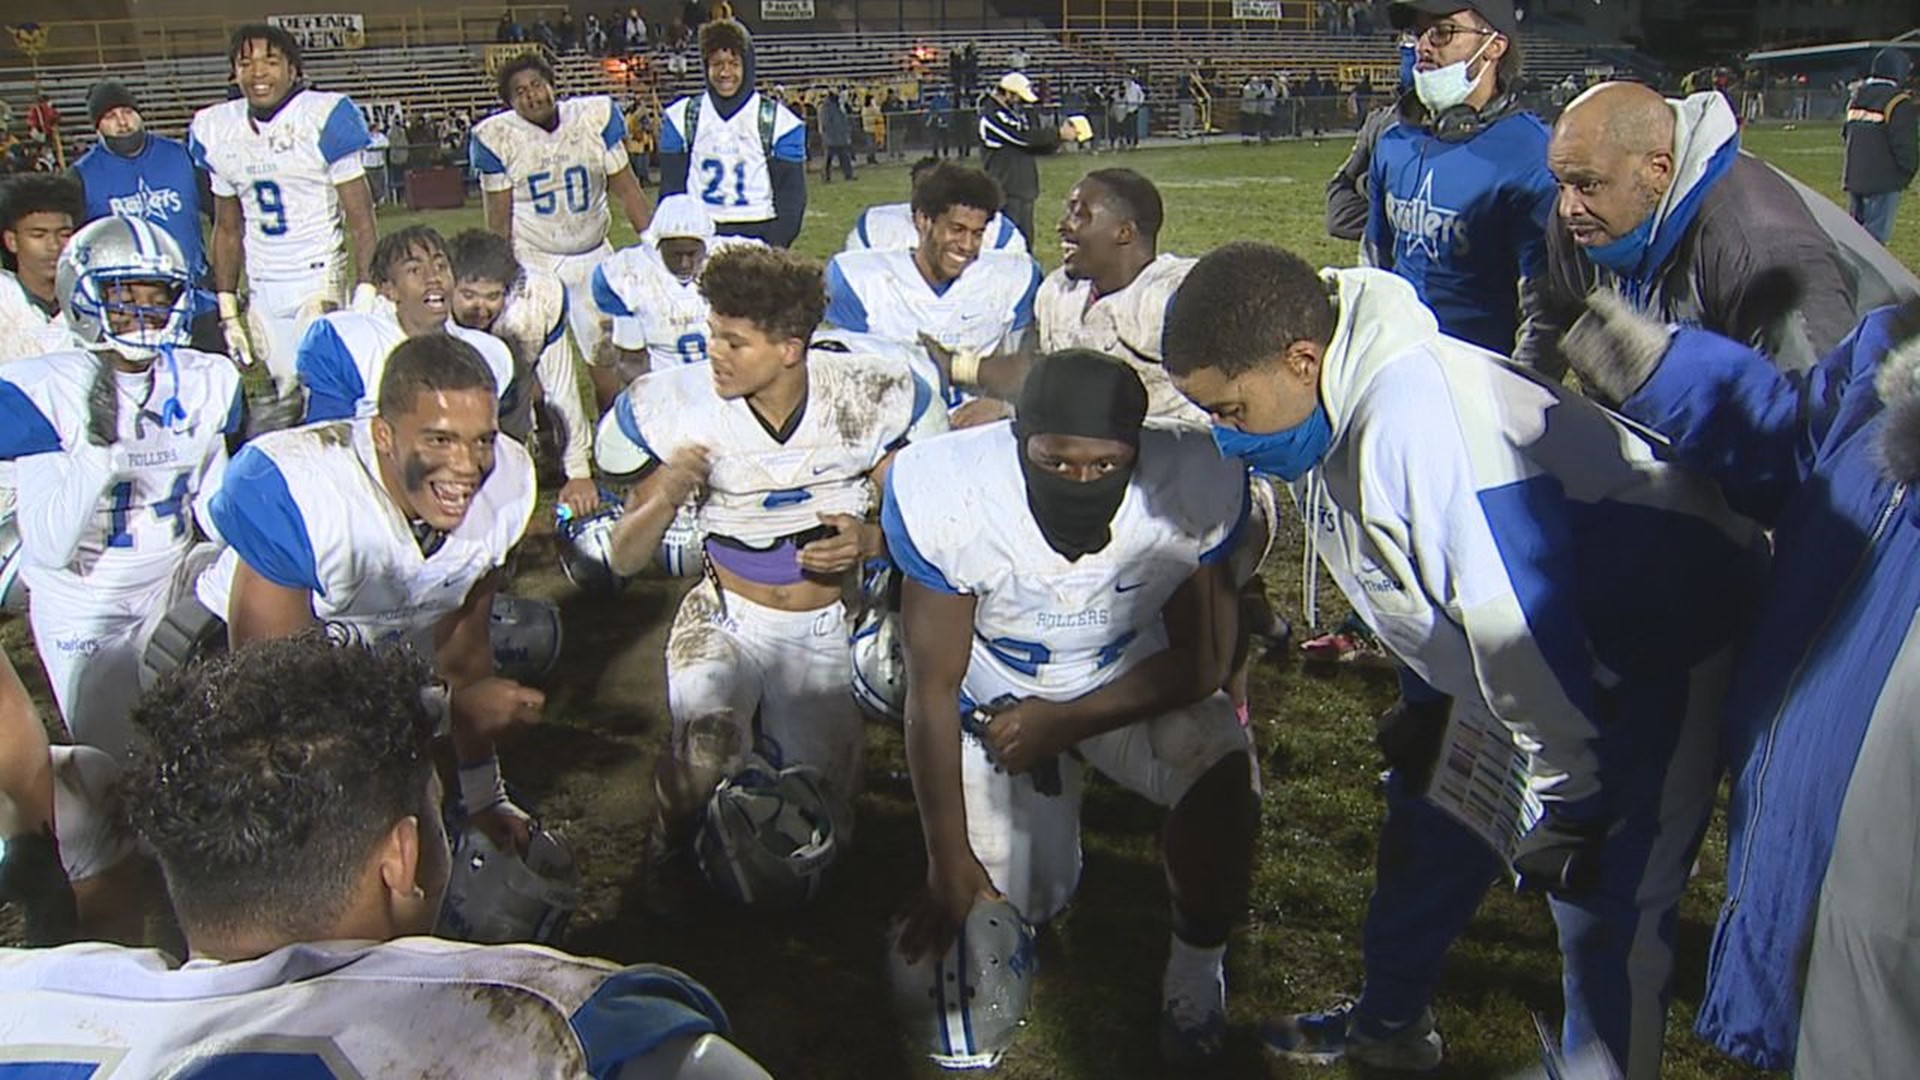 Steel-High advances in the state playoffs and you can see the extended highlights right here.